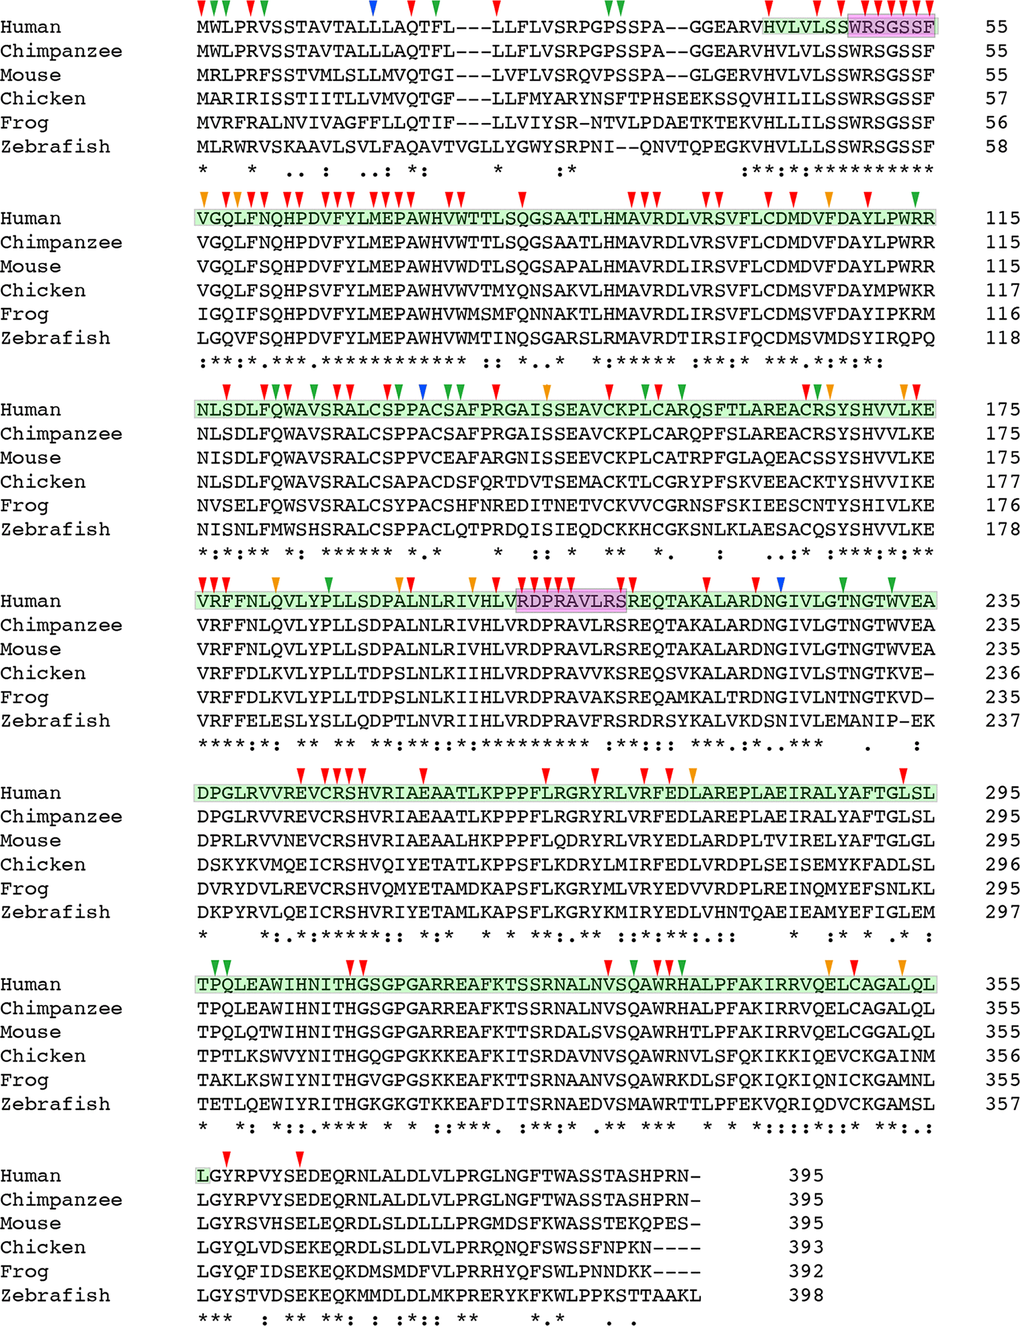 Multiple sequence alignment result of CHST6 protein. Protein sequences for CHST6 retrieved from NCBI for human, chimpanzee, mouse, chicken, frog and zebrafish showed amino acid conservation among different vertebrate species (for mouse, the sequence of CHST5 was used here). The sulfotransferase domain (residue 42-356) was labeled in cyan, and the two PAPS binding sites (residue 49-55 and 202-210) were labeled in carmine. Arrowheads indicated amino acid changes caused by reported human mutations. Strongly conserved positions were labeled with red or orange arrowheads, while weakly conserved ones were labeled with blue or green arrowheads (annotated by Clustal Omega).